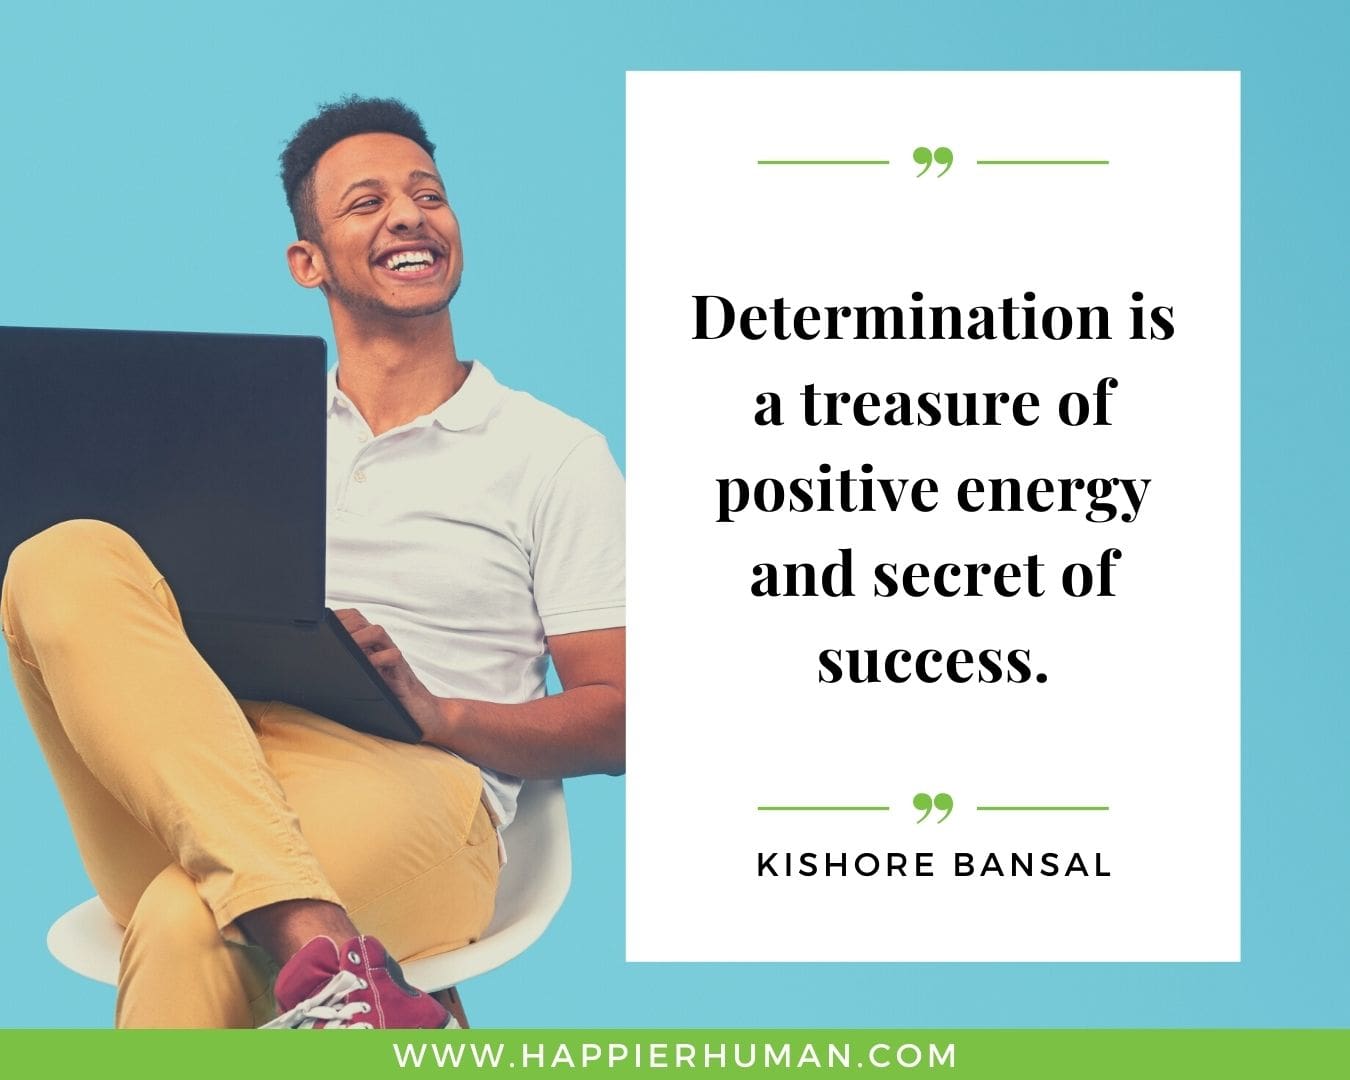 Positive Energy Quotes - “Determination is a treasure of positive energy and secret of success.” - Kishore Bansal